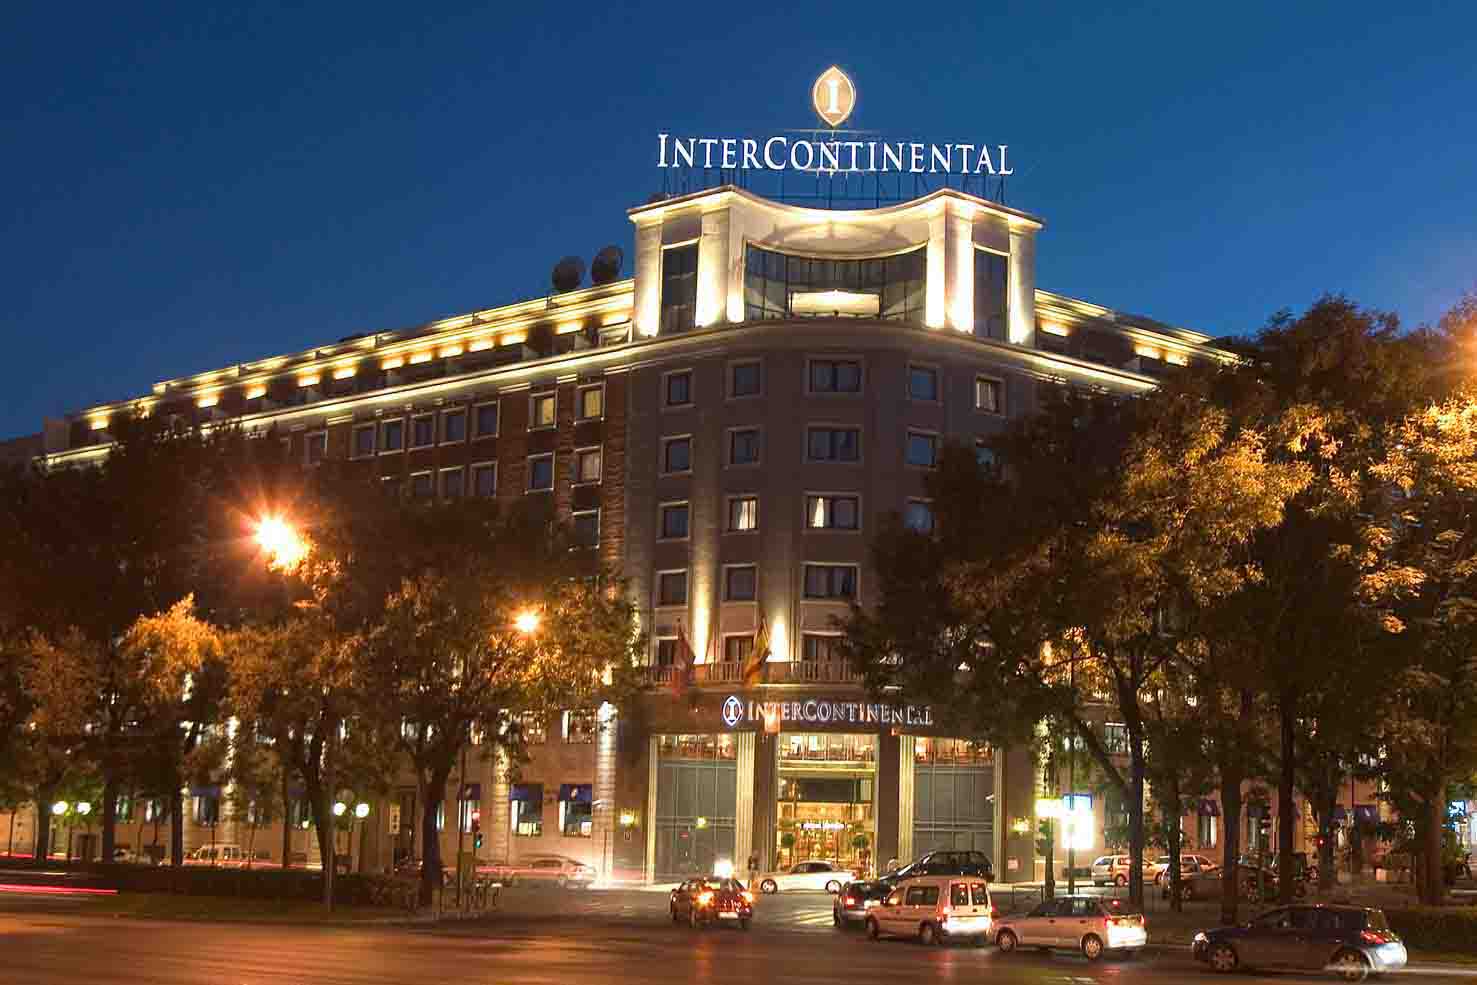 Intercontinental Madrid Spain Projects Global Asset Solutions